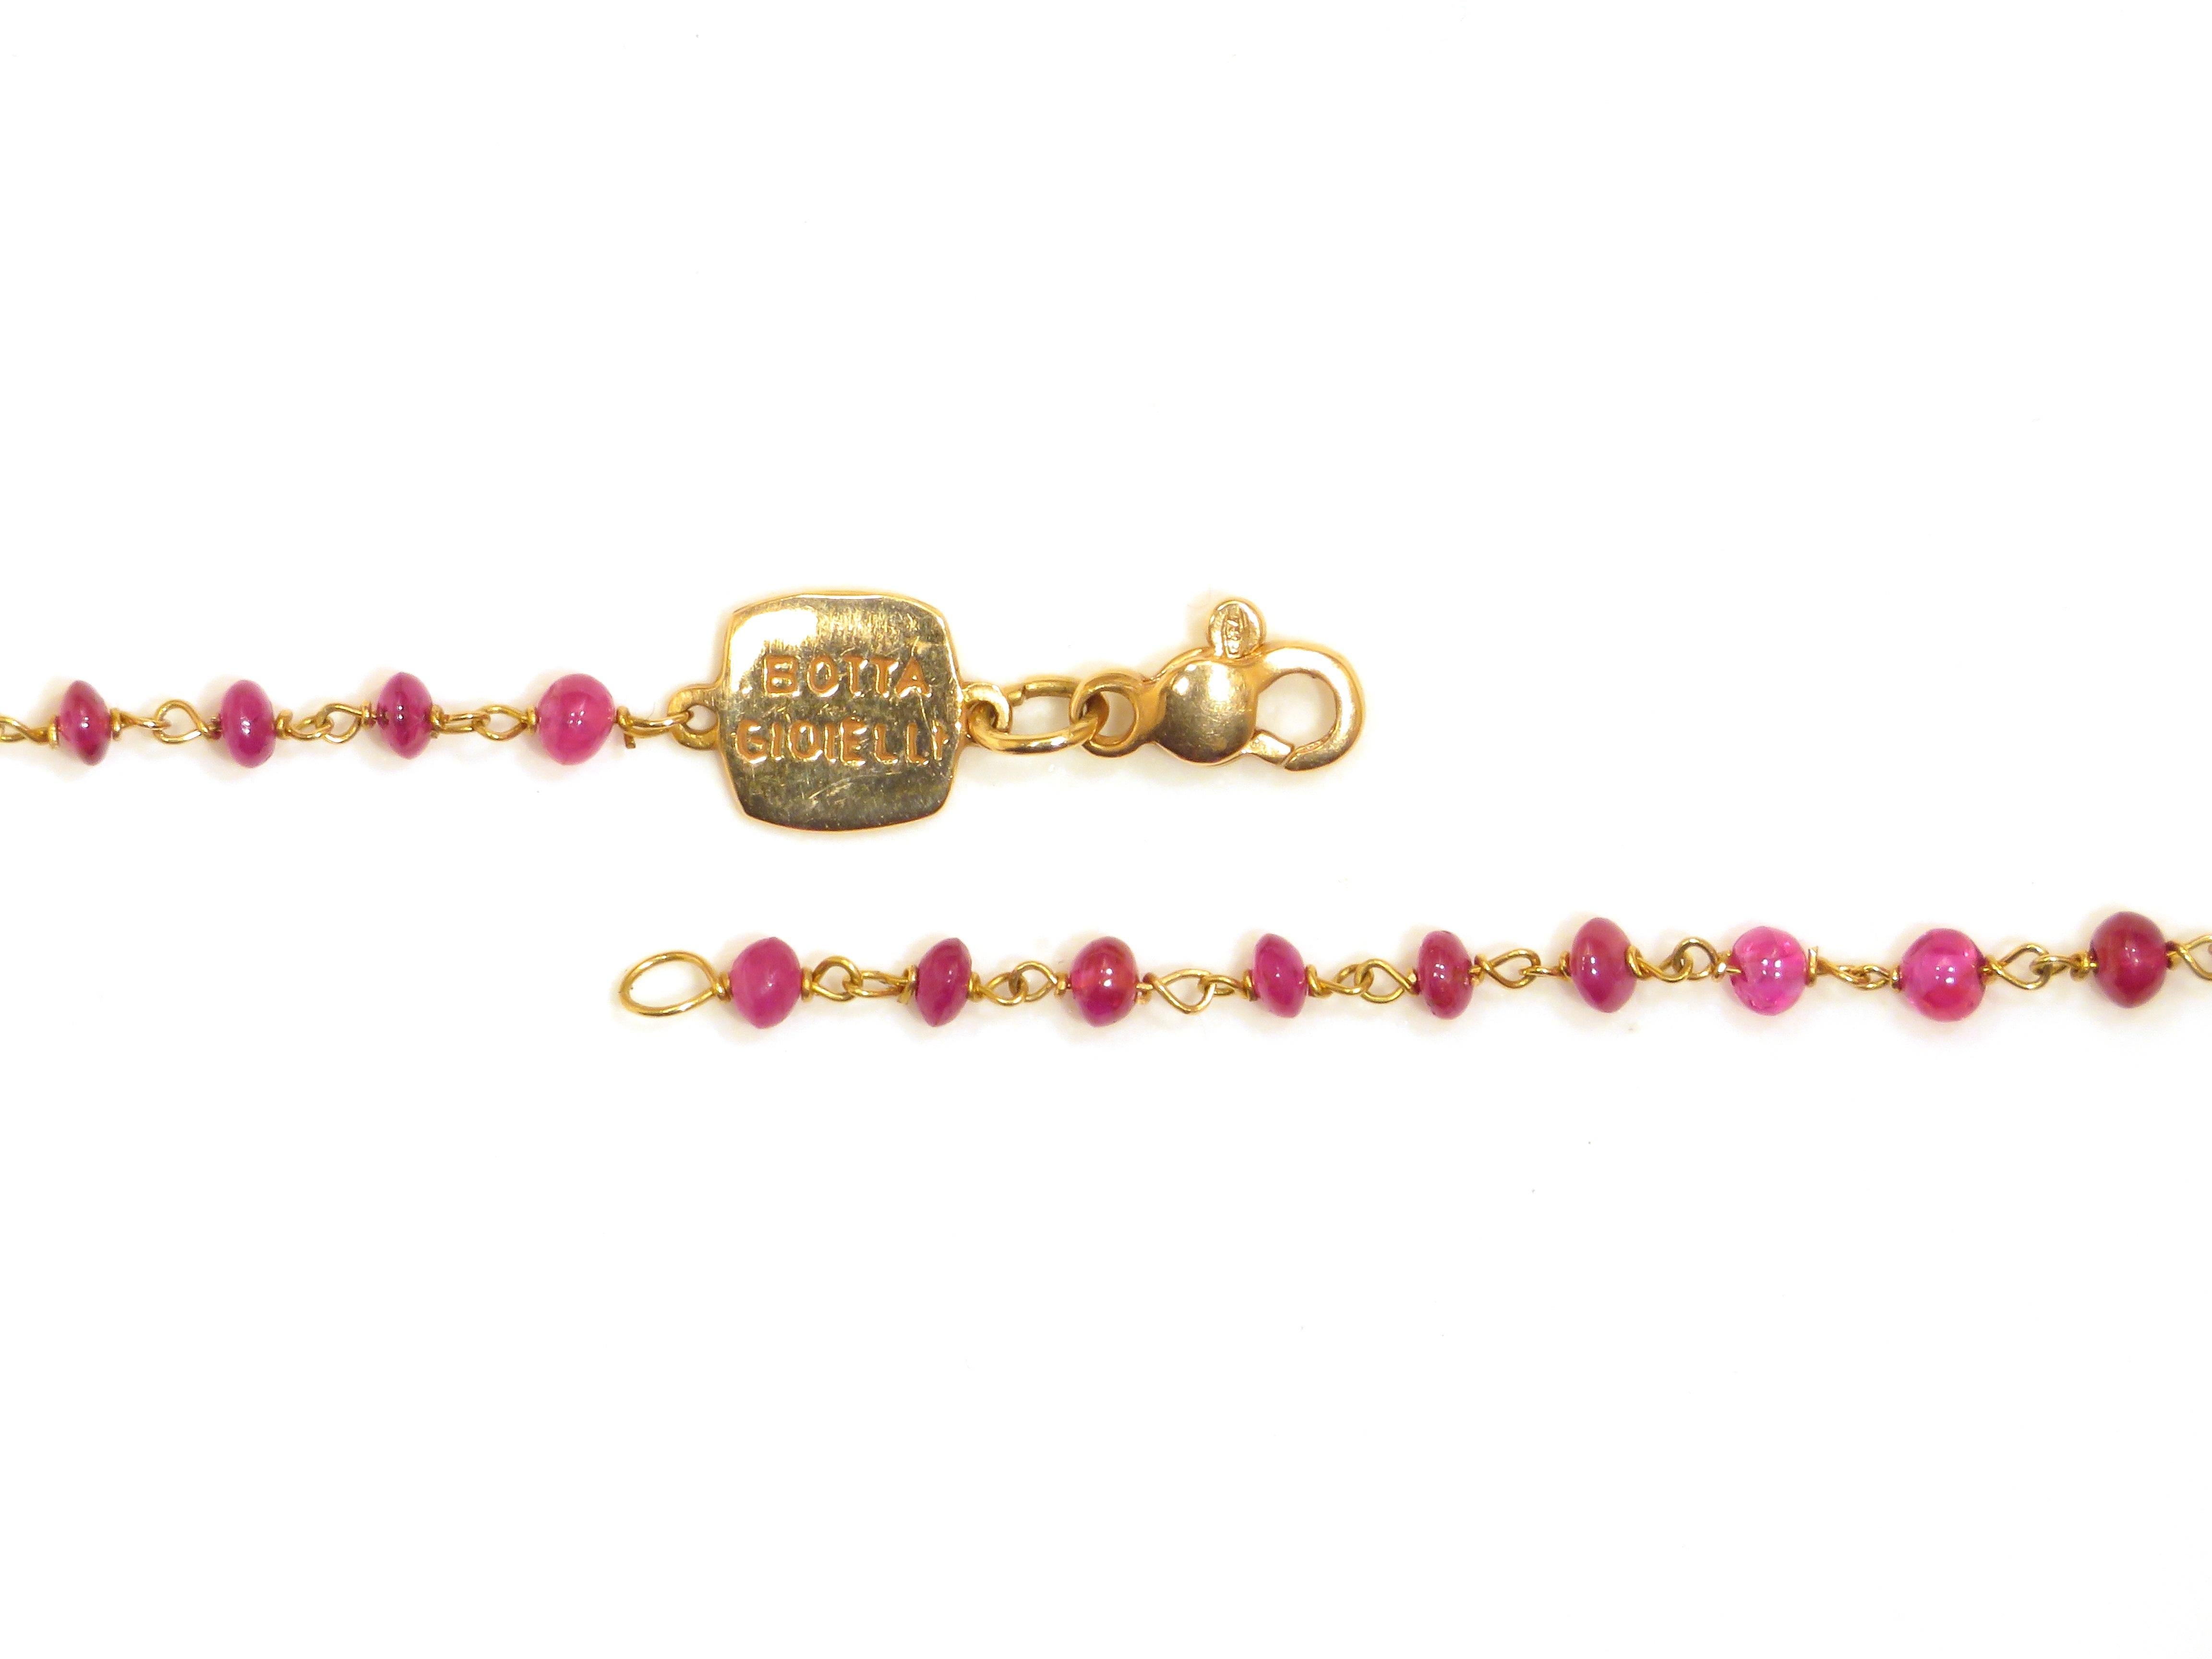 Unbelievable natural rubies nuggets necklace in 18 karat rose gold. Handcrafted in Italy by Botta Gioielli. Total length is 380 millimeters / 14.96 inches. The circumference of each nugget ruby is 3-4 mm / 0.118-0.157 inches. This item is marked